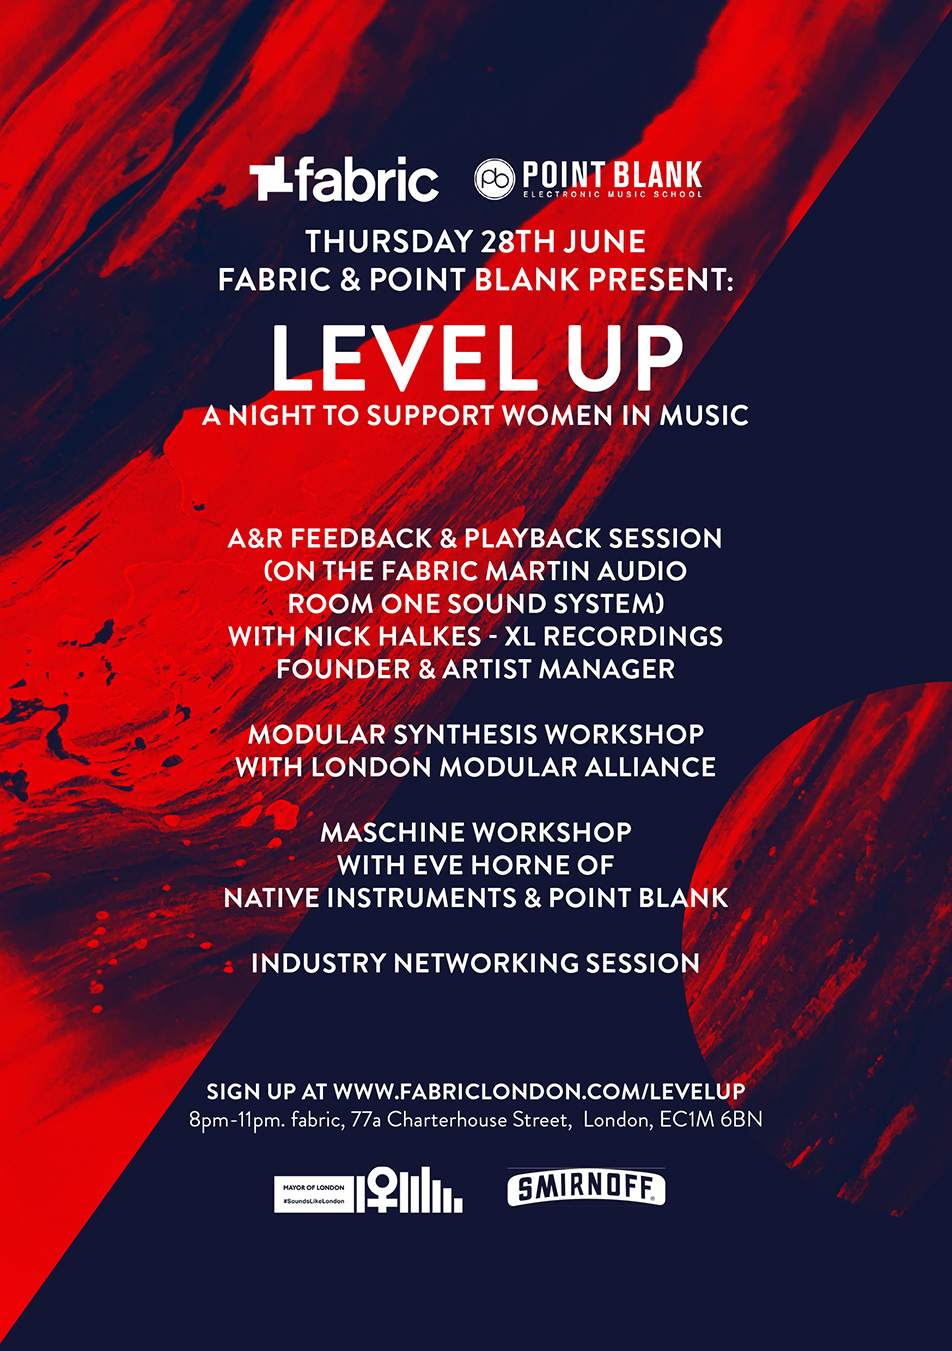 fabric to host tech workshops, networking sessions for women in electronic music image